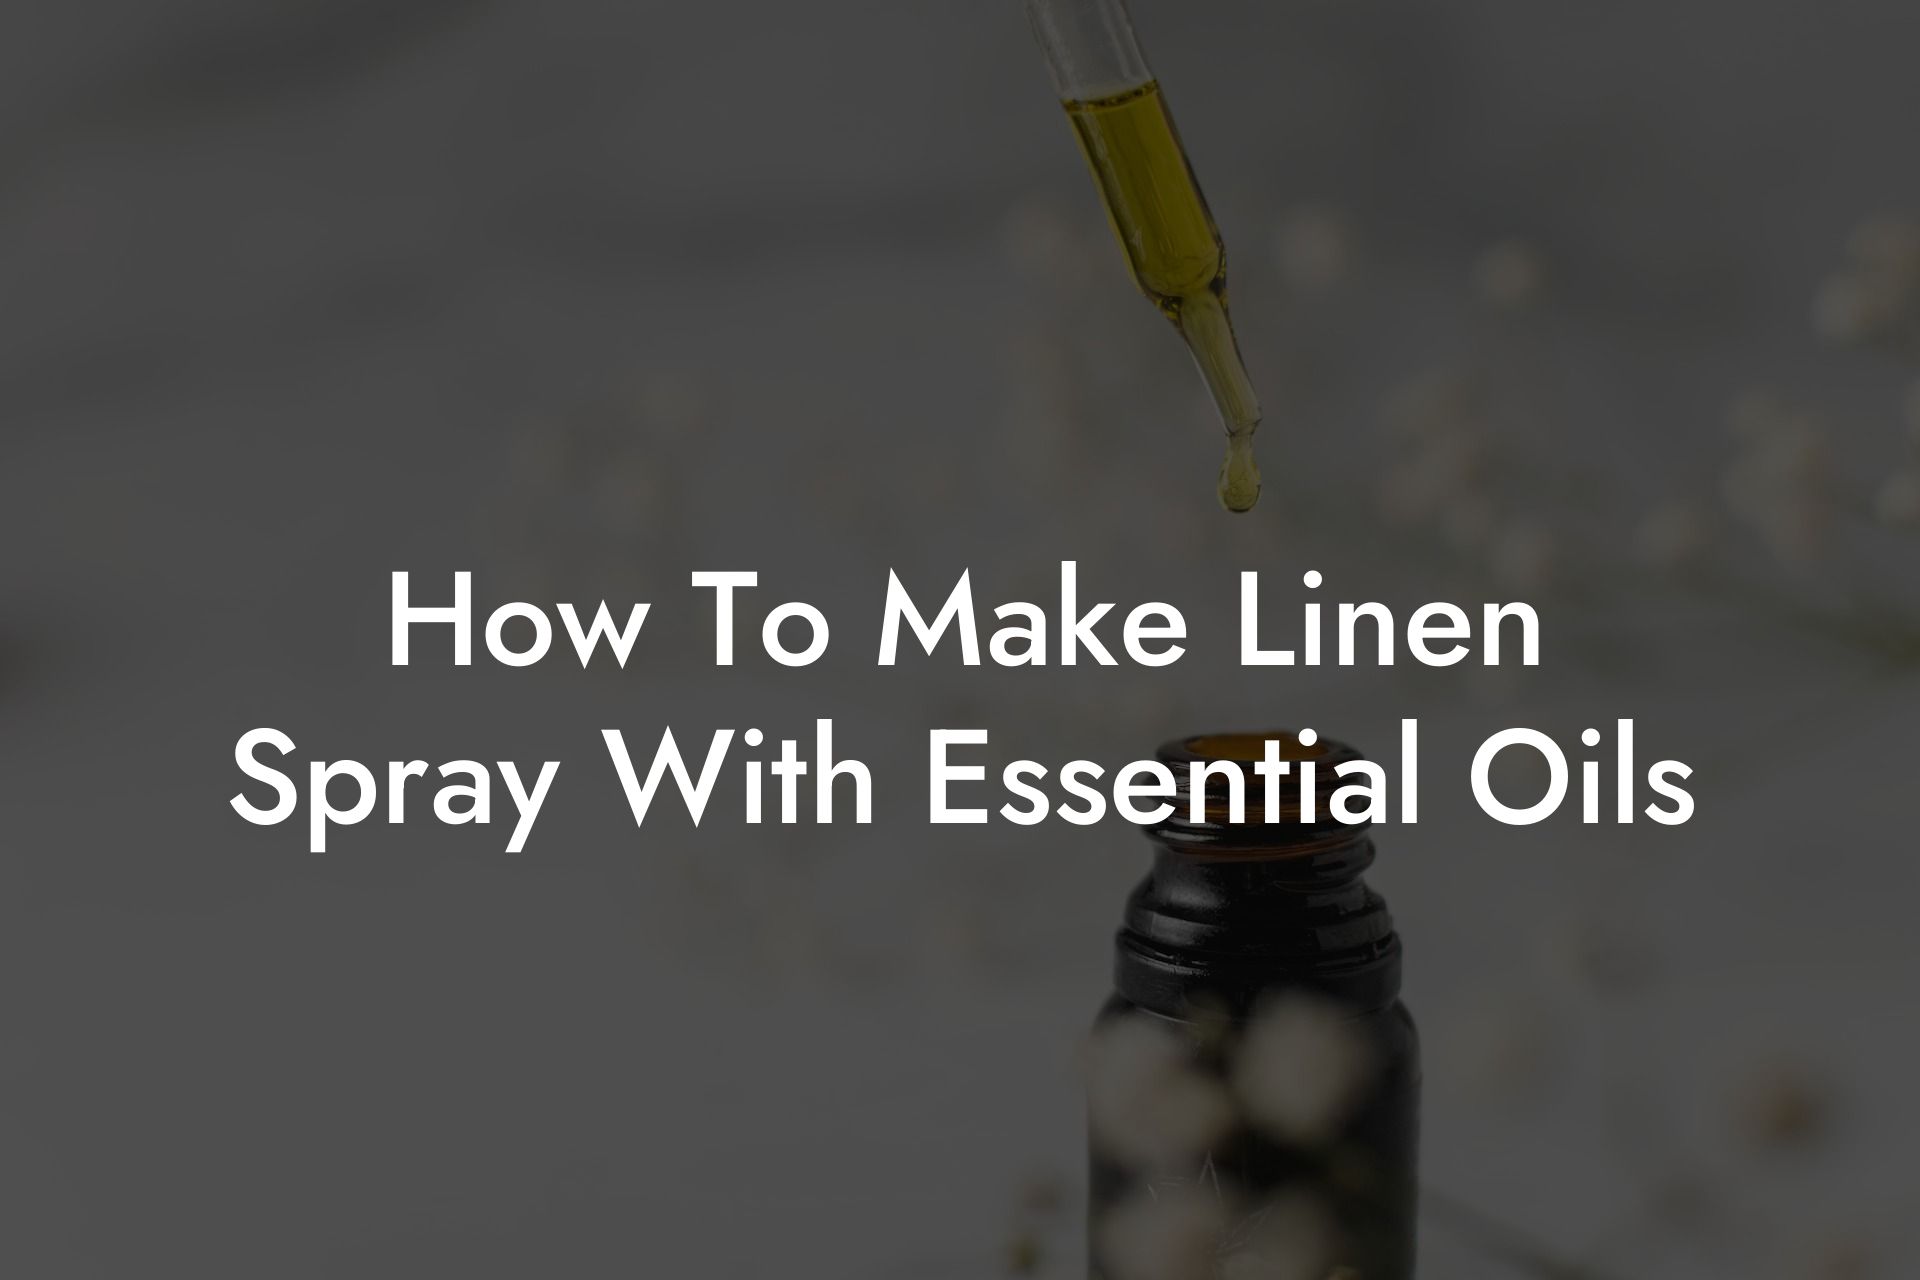 How To Make Linen Spray With Essential Oils